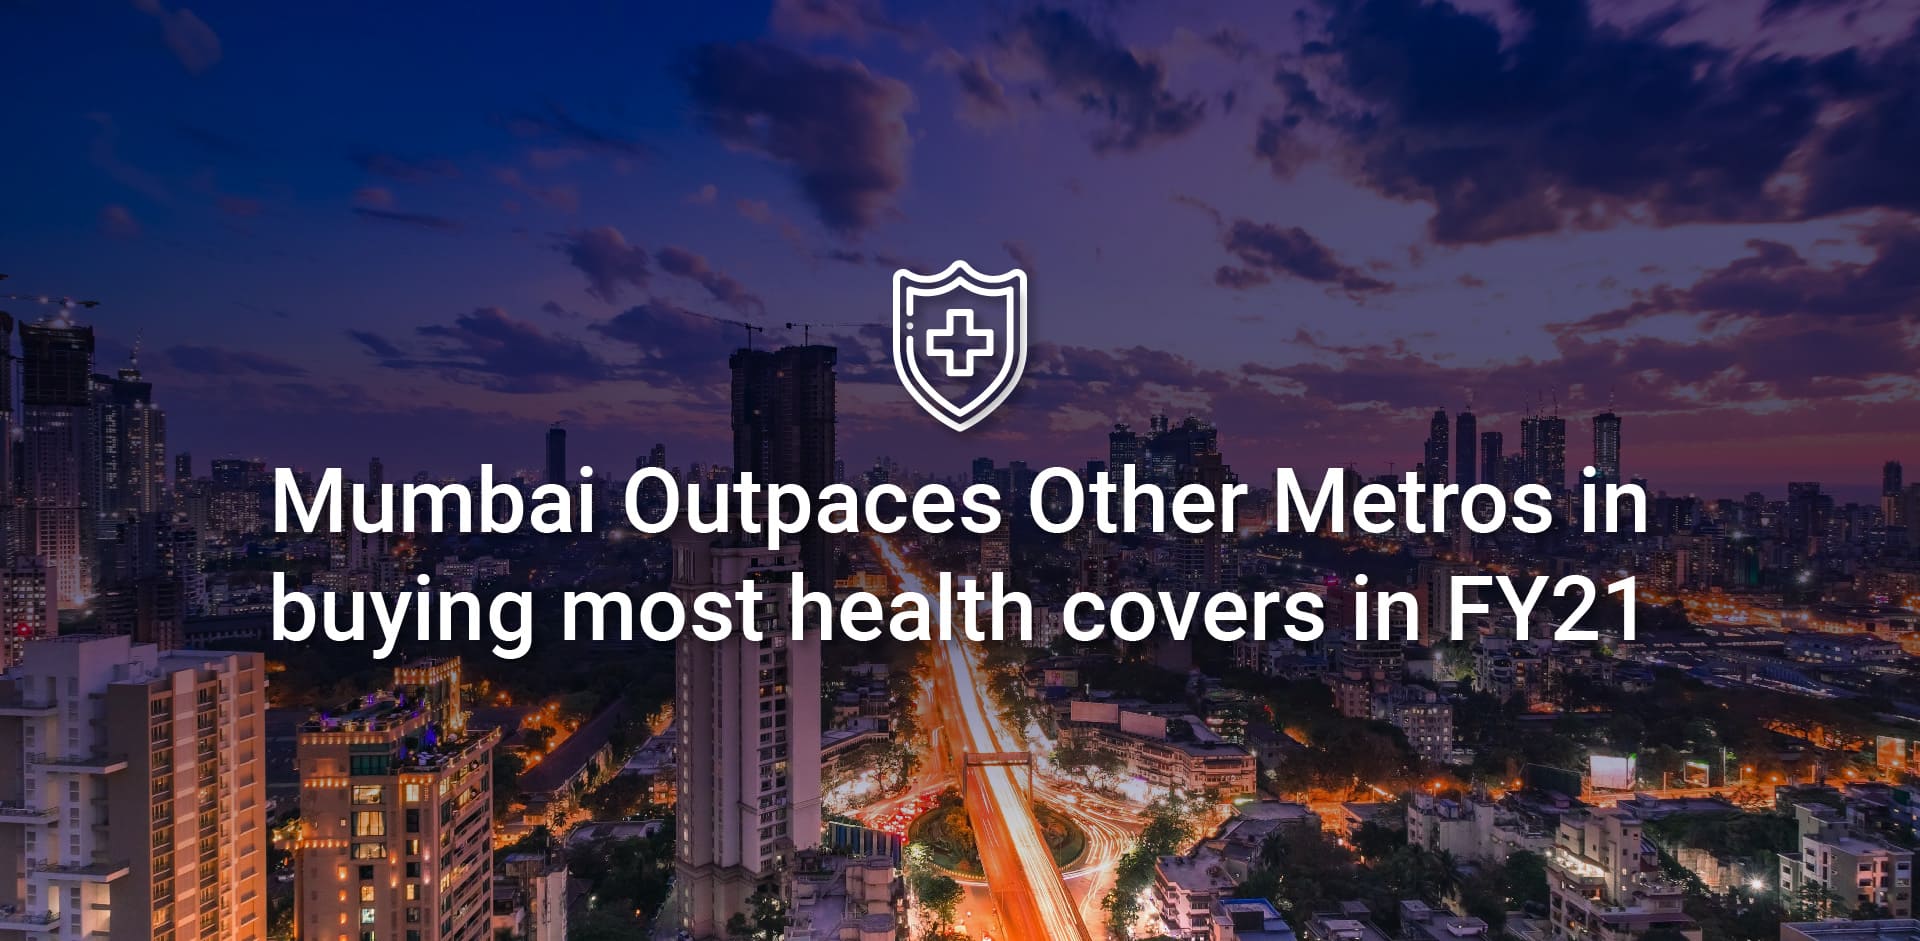 Mumbai Outpaces Other Metros in buying most health covers in FY21